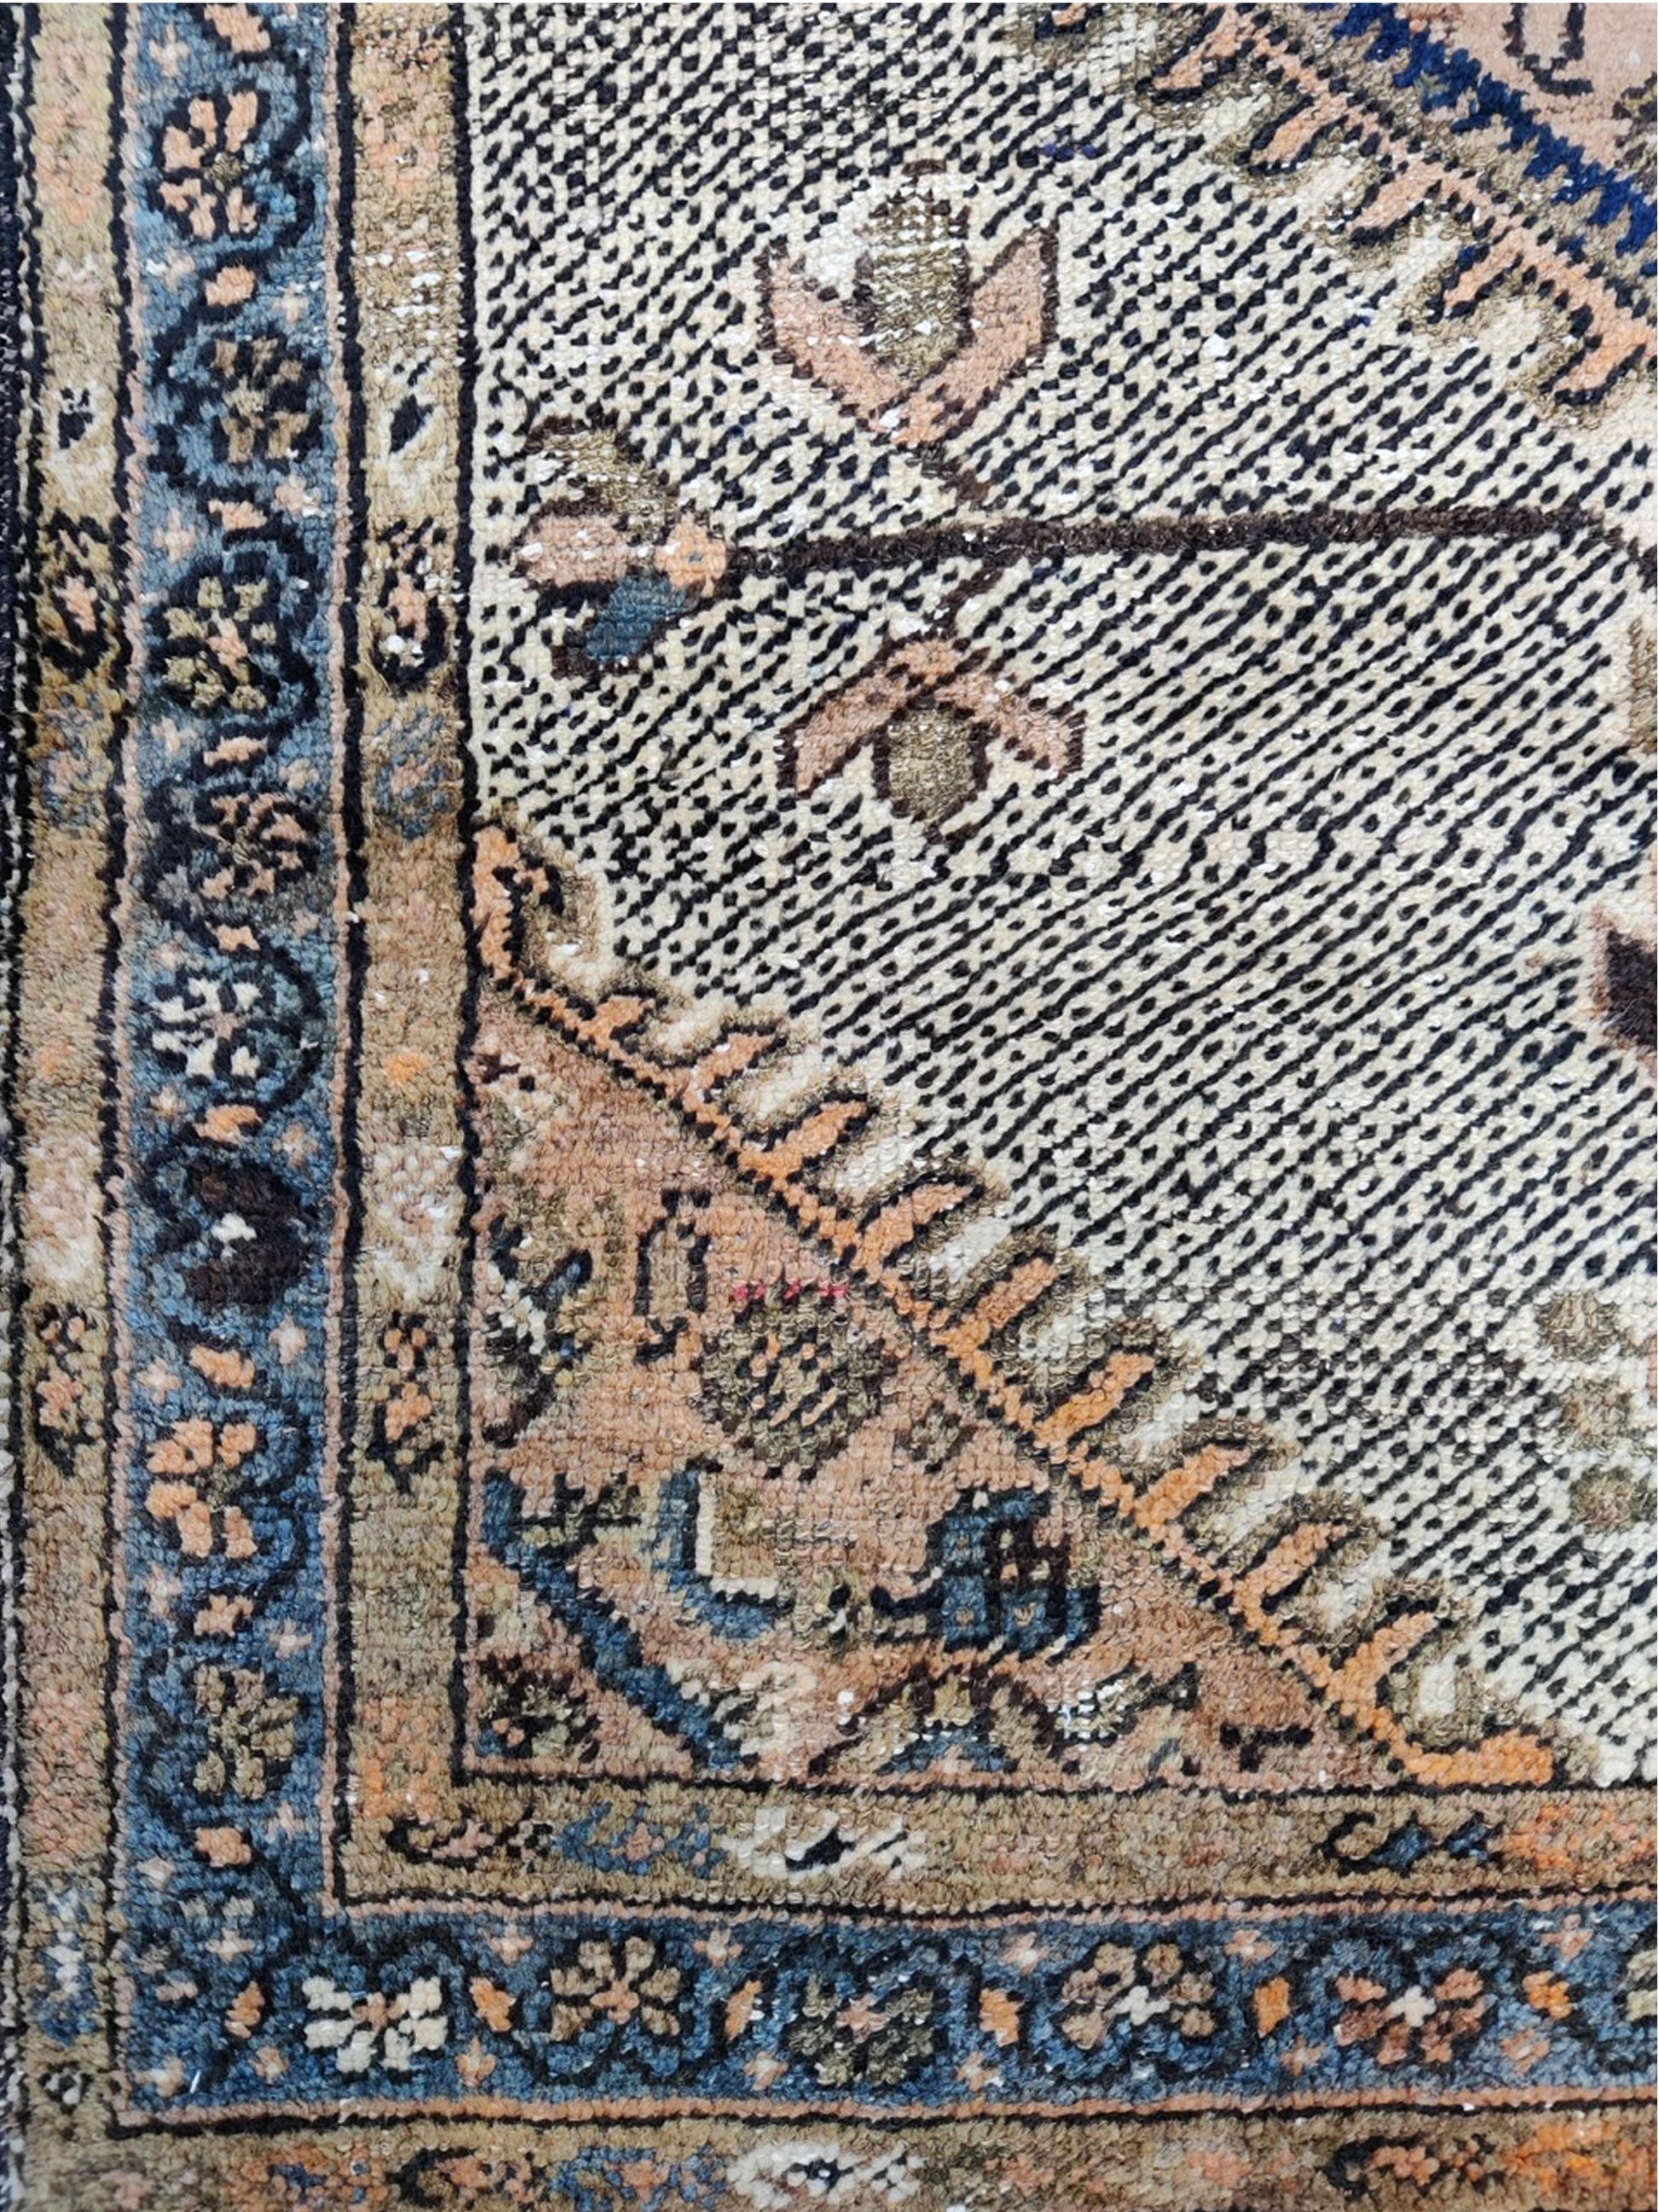 Get trendy with Orange Brown Antique Khotan Handknotted Rug 3.8x5.6ft 112x167cms - Tribal Rugs available at Jaipur Oriental Rugs. Grab yours for $1100.00 today!